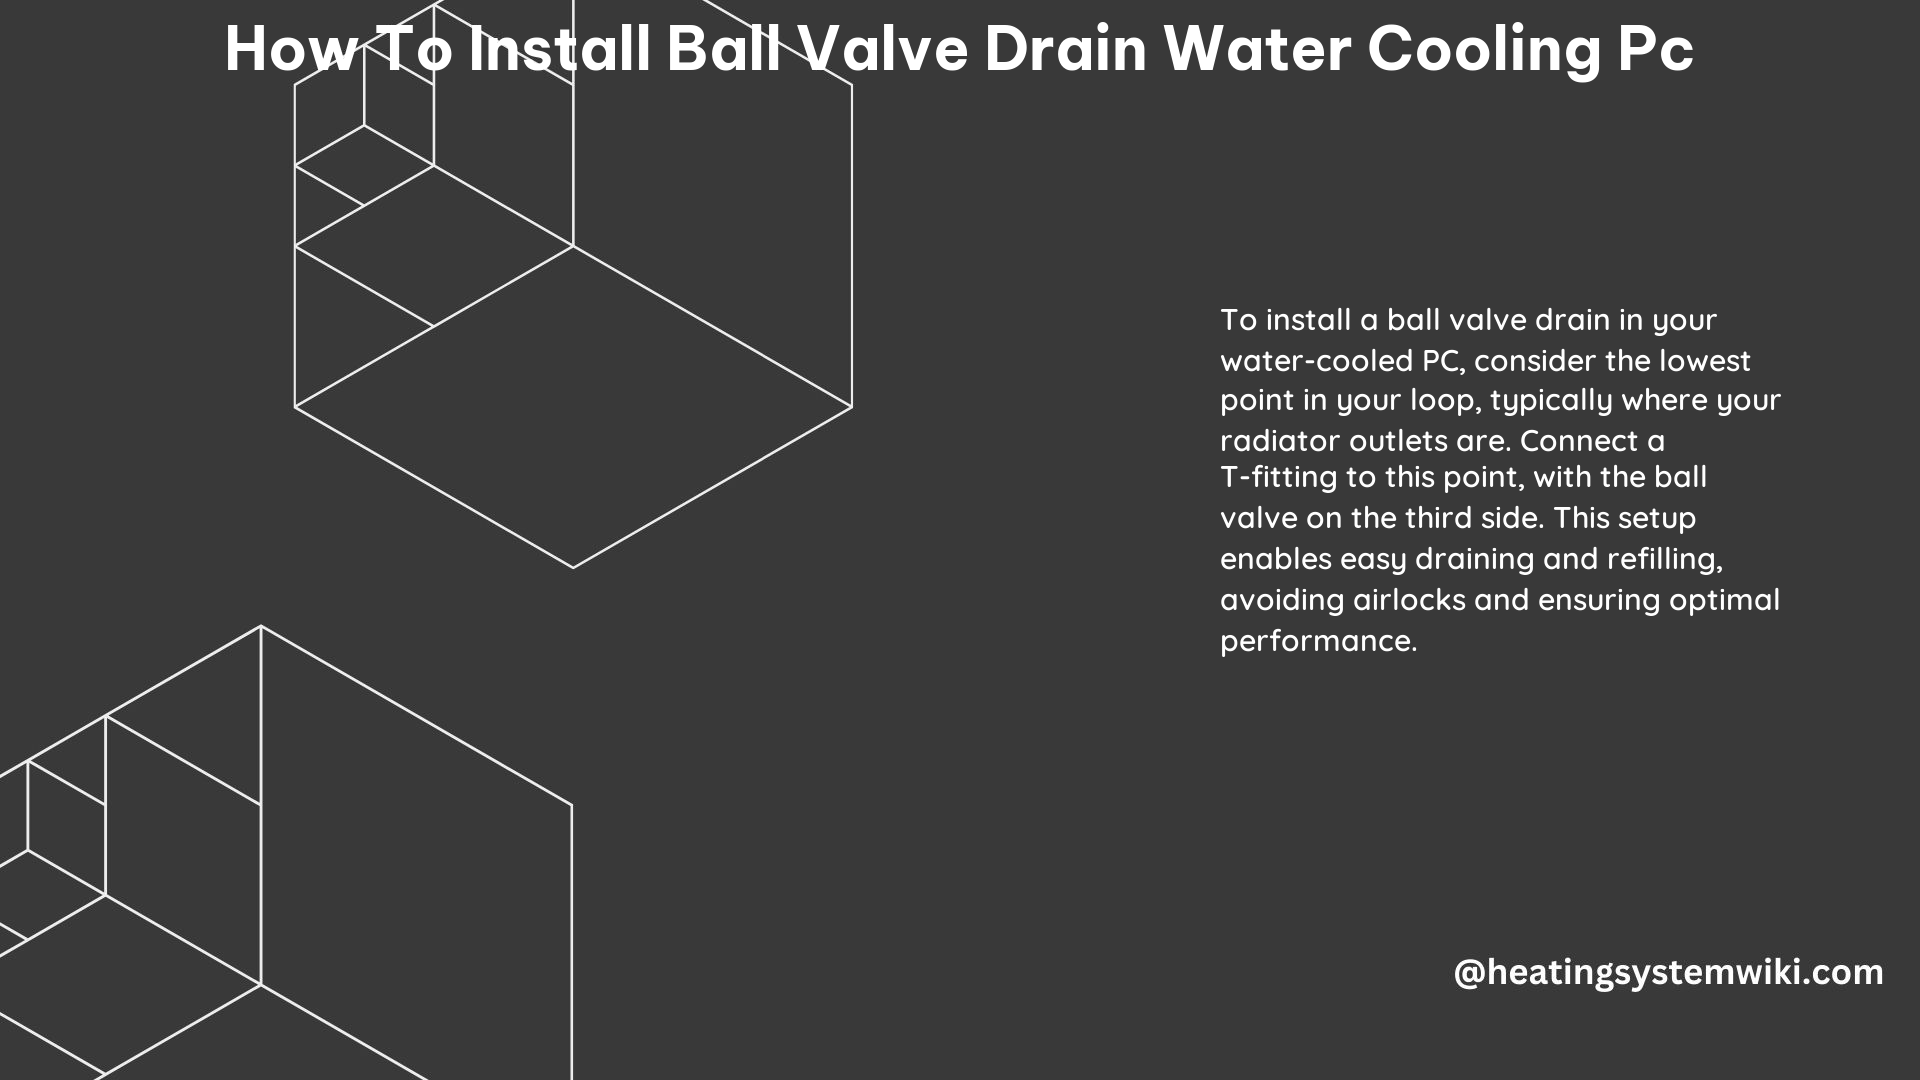 How to Install Ball Valve Drain Water Cooling PC